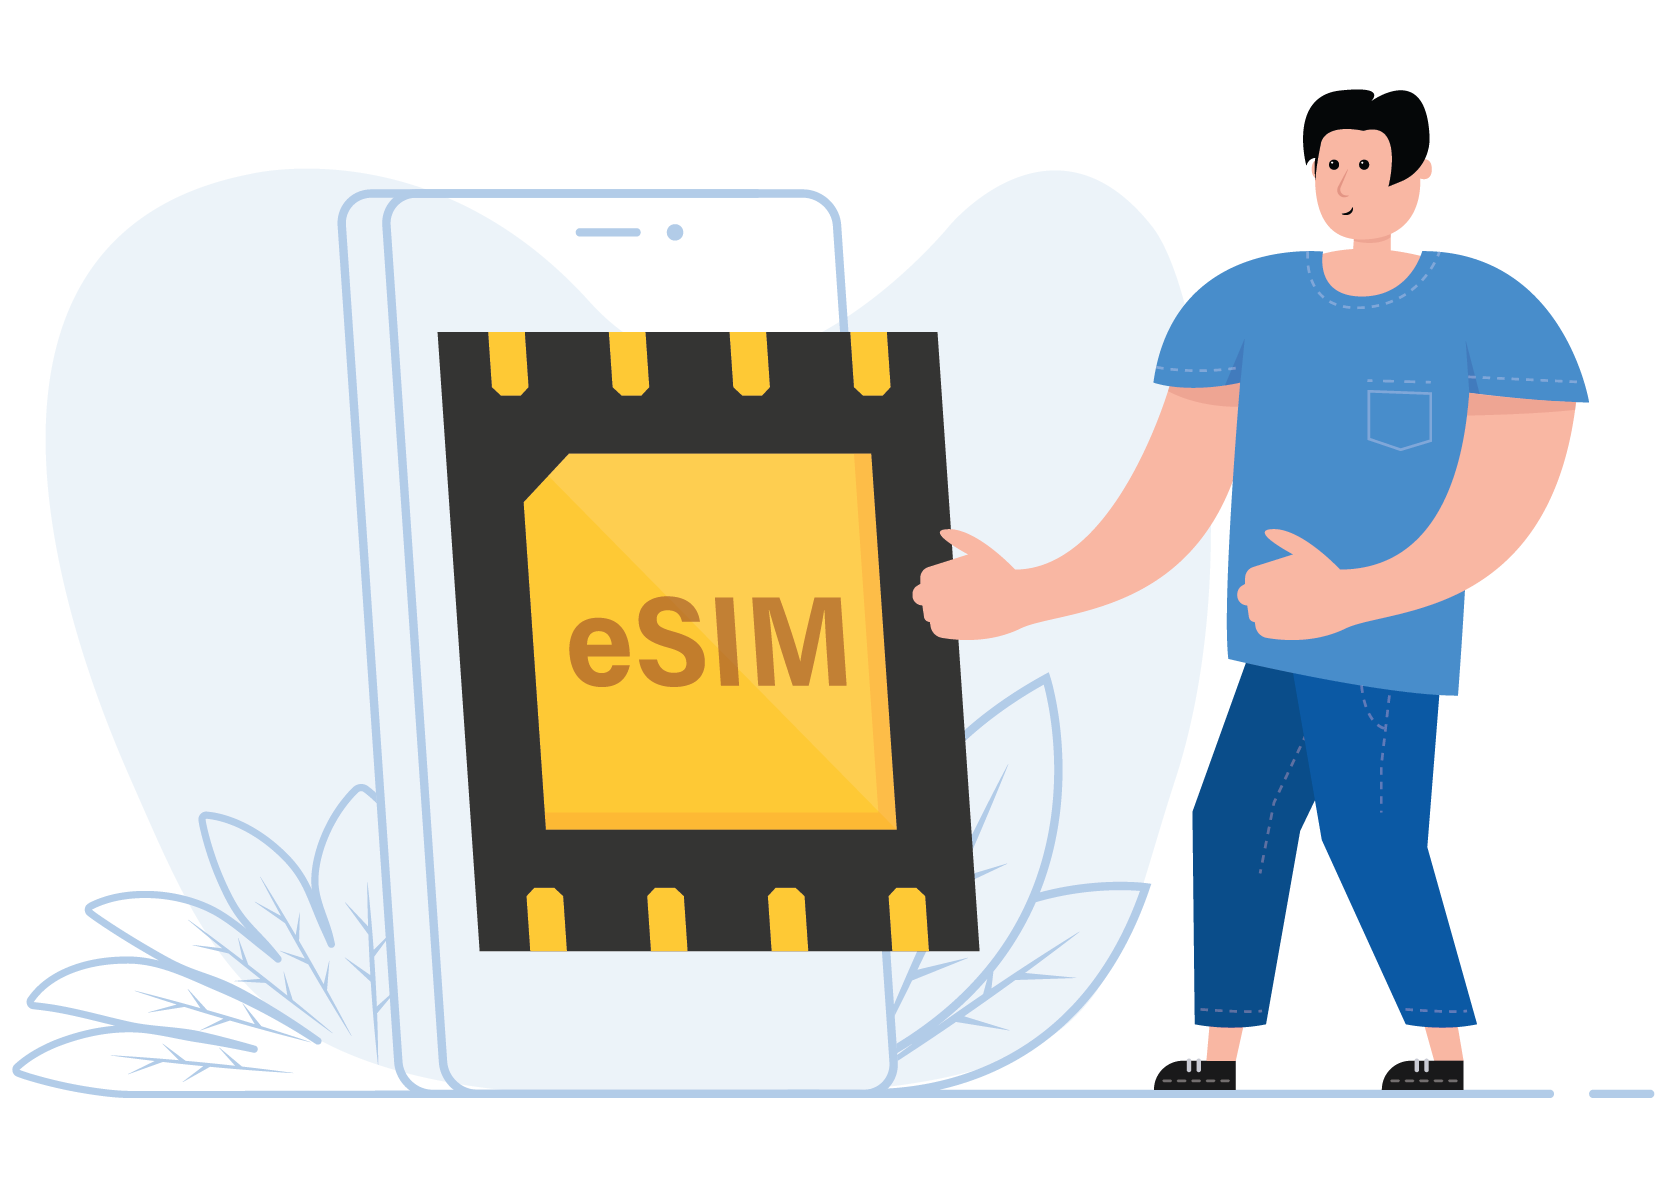 Put our most affordable eSIM in everyone's hands